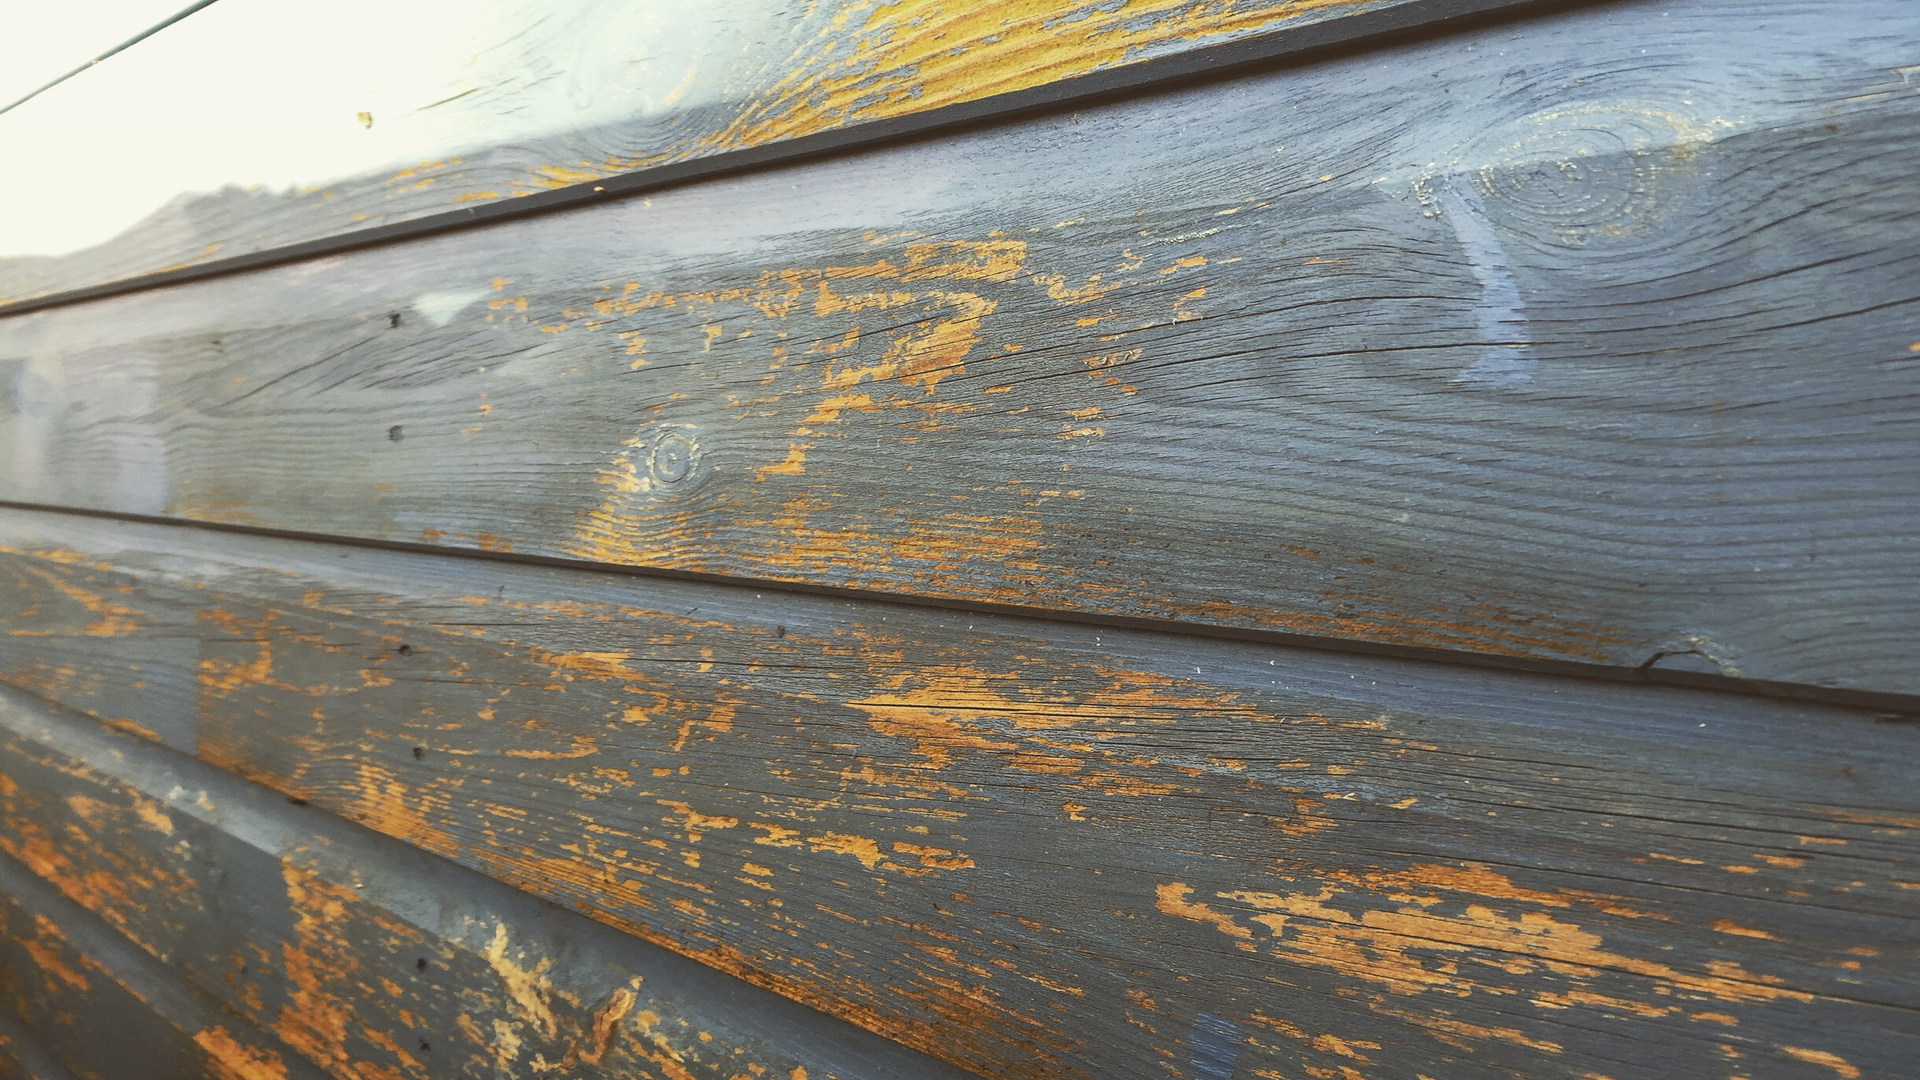 Staining wood, Black wood stain, Wood stain colors